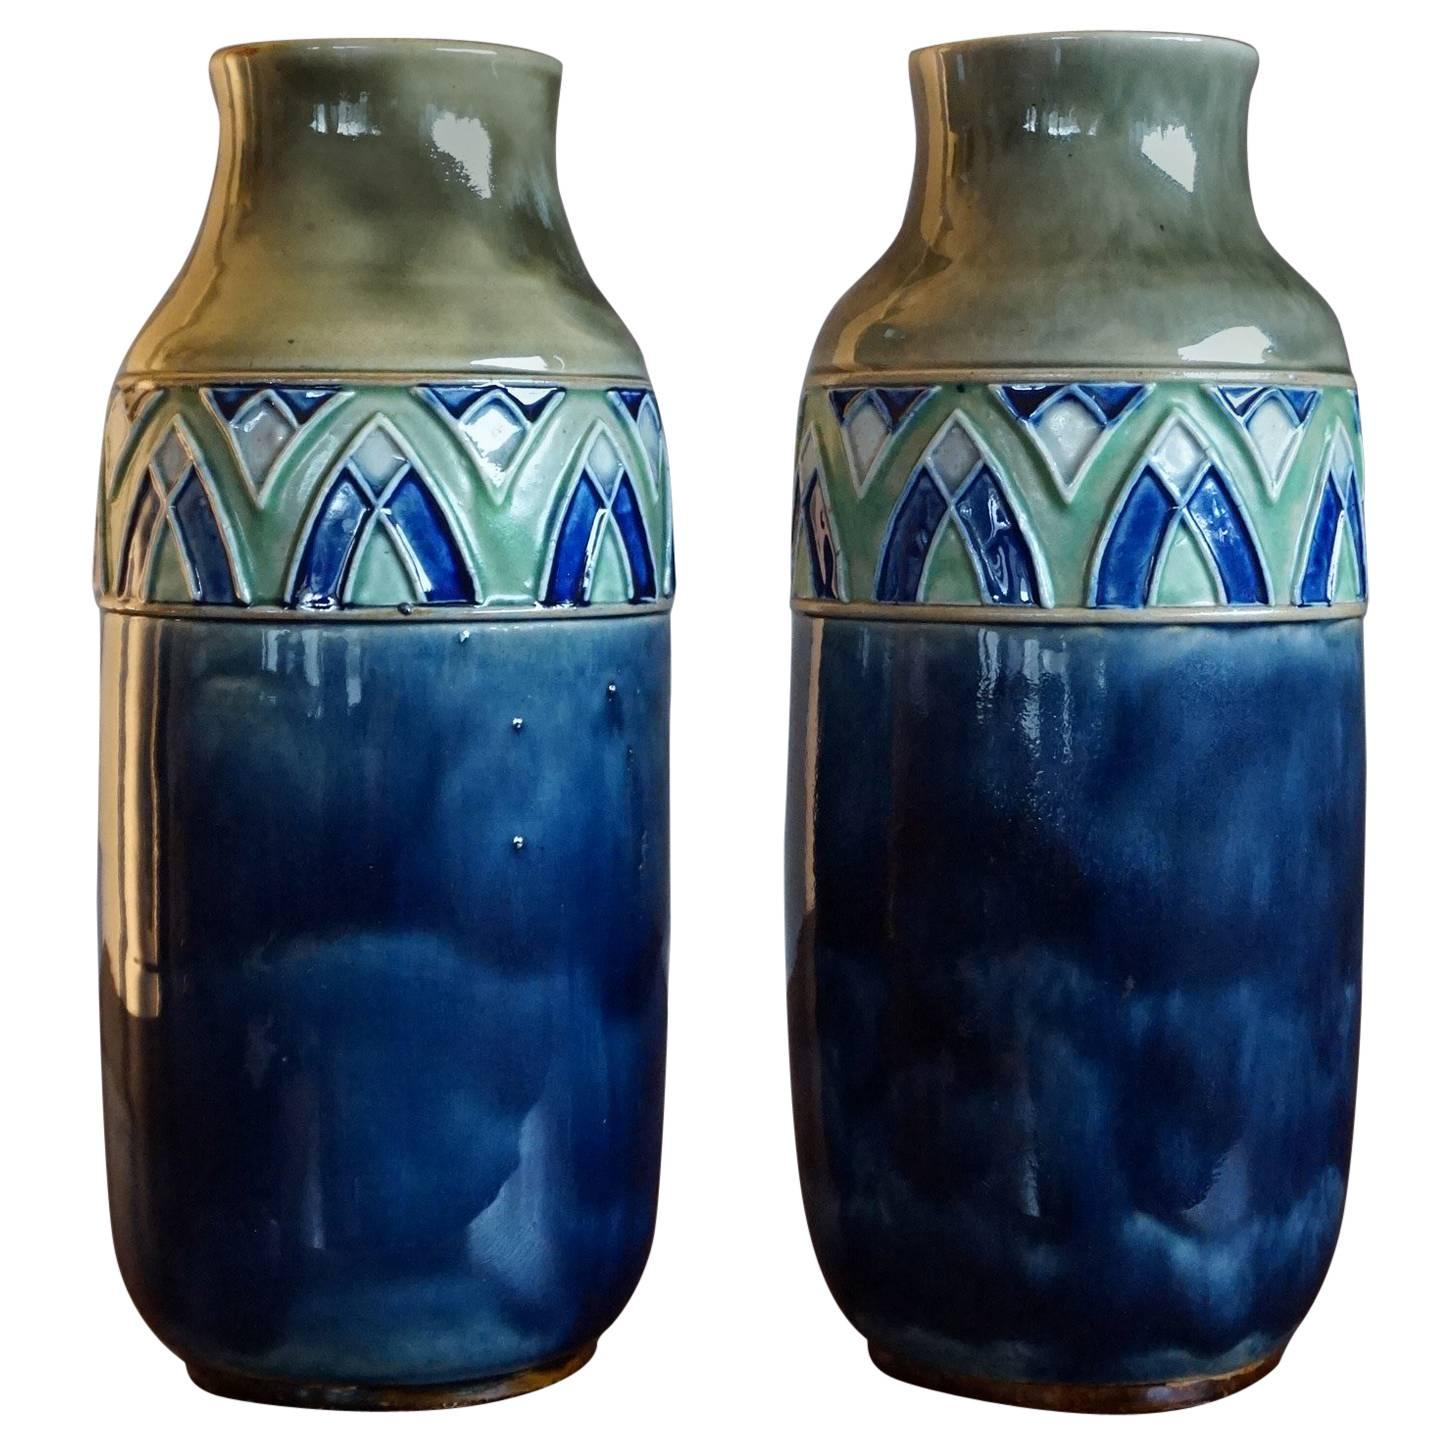 Great Quality & Condition Pair of Arts and Crafts Ceramic Vases by Royal Doulton